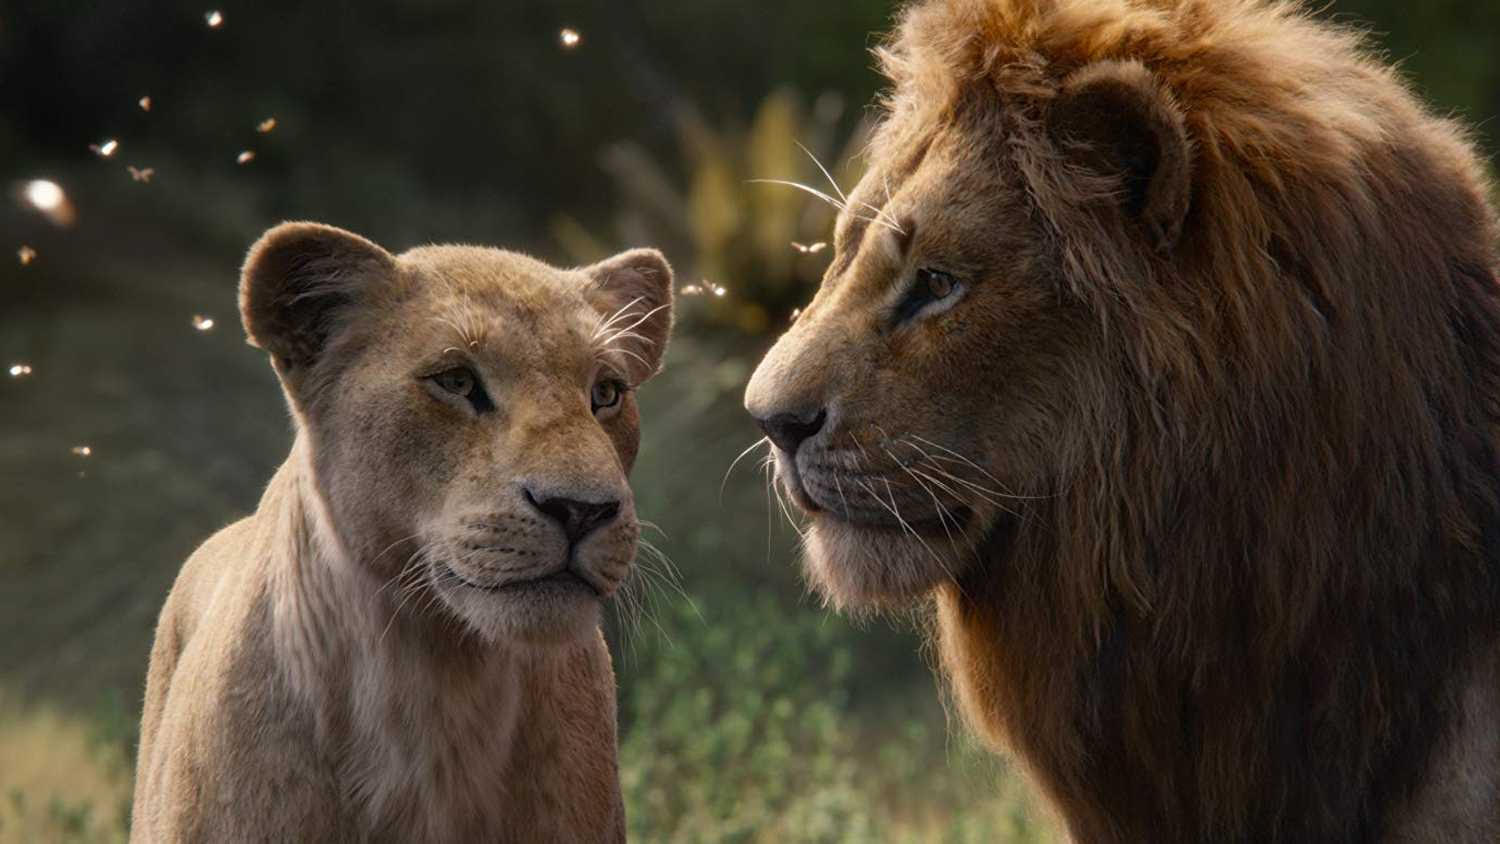 ‘The Lion King’ Had The Lions Share At The Box Office This Weekend